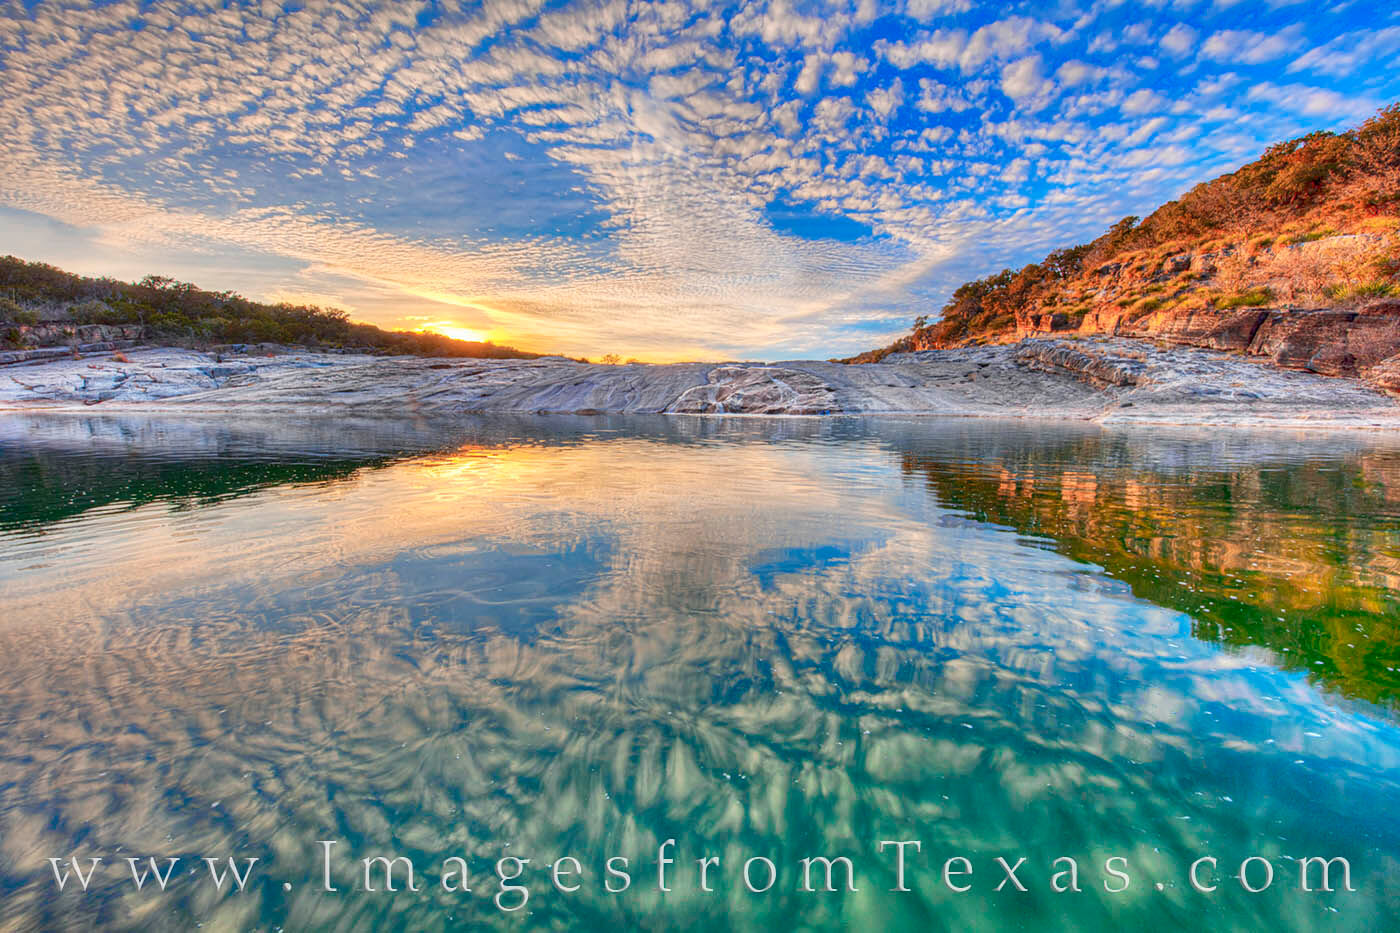 A stunning sunset sky is reflected in a calm pool along the Pedernales River. I loved how the blue and aqua colors blended together...